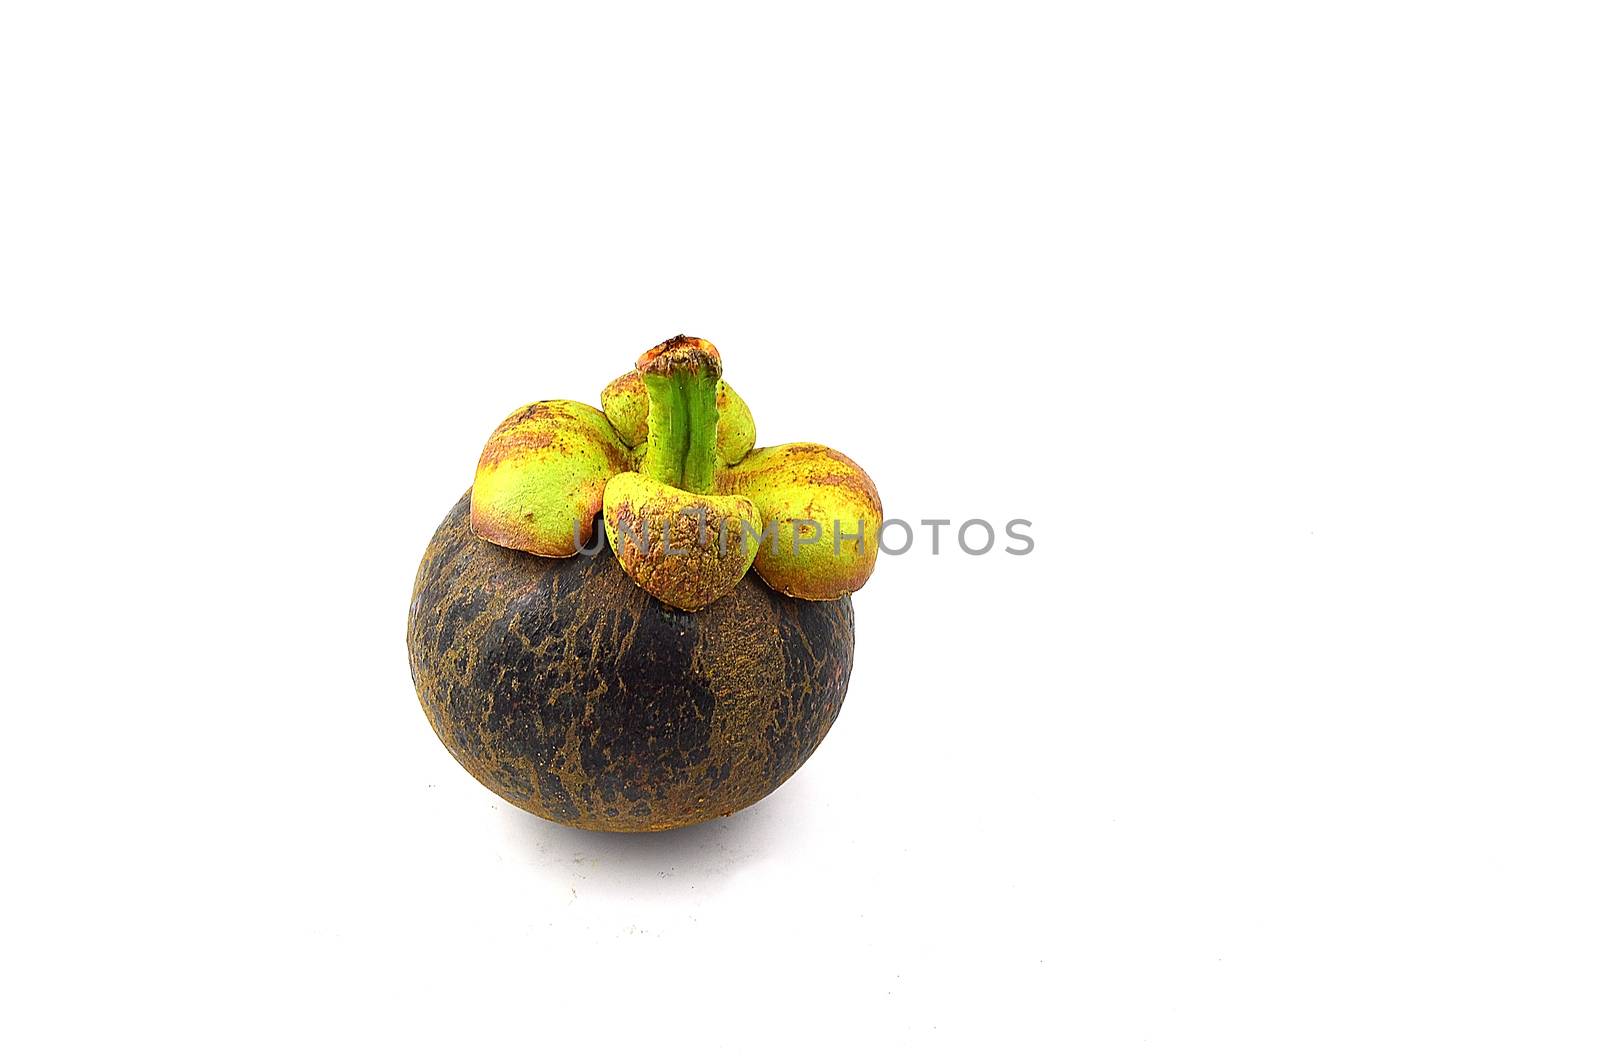 mangosteen fruit and cross section by Lekchangply